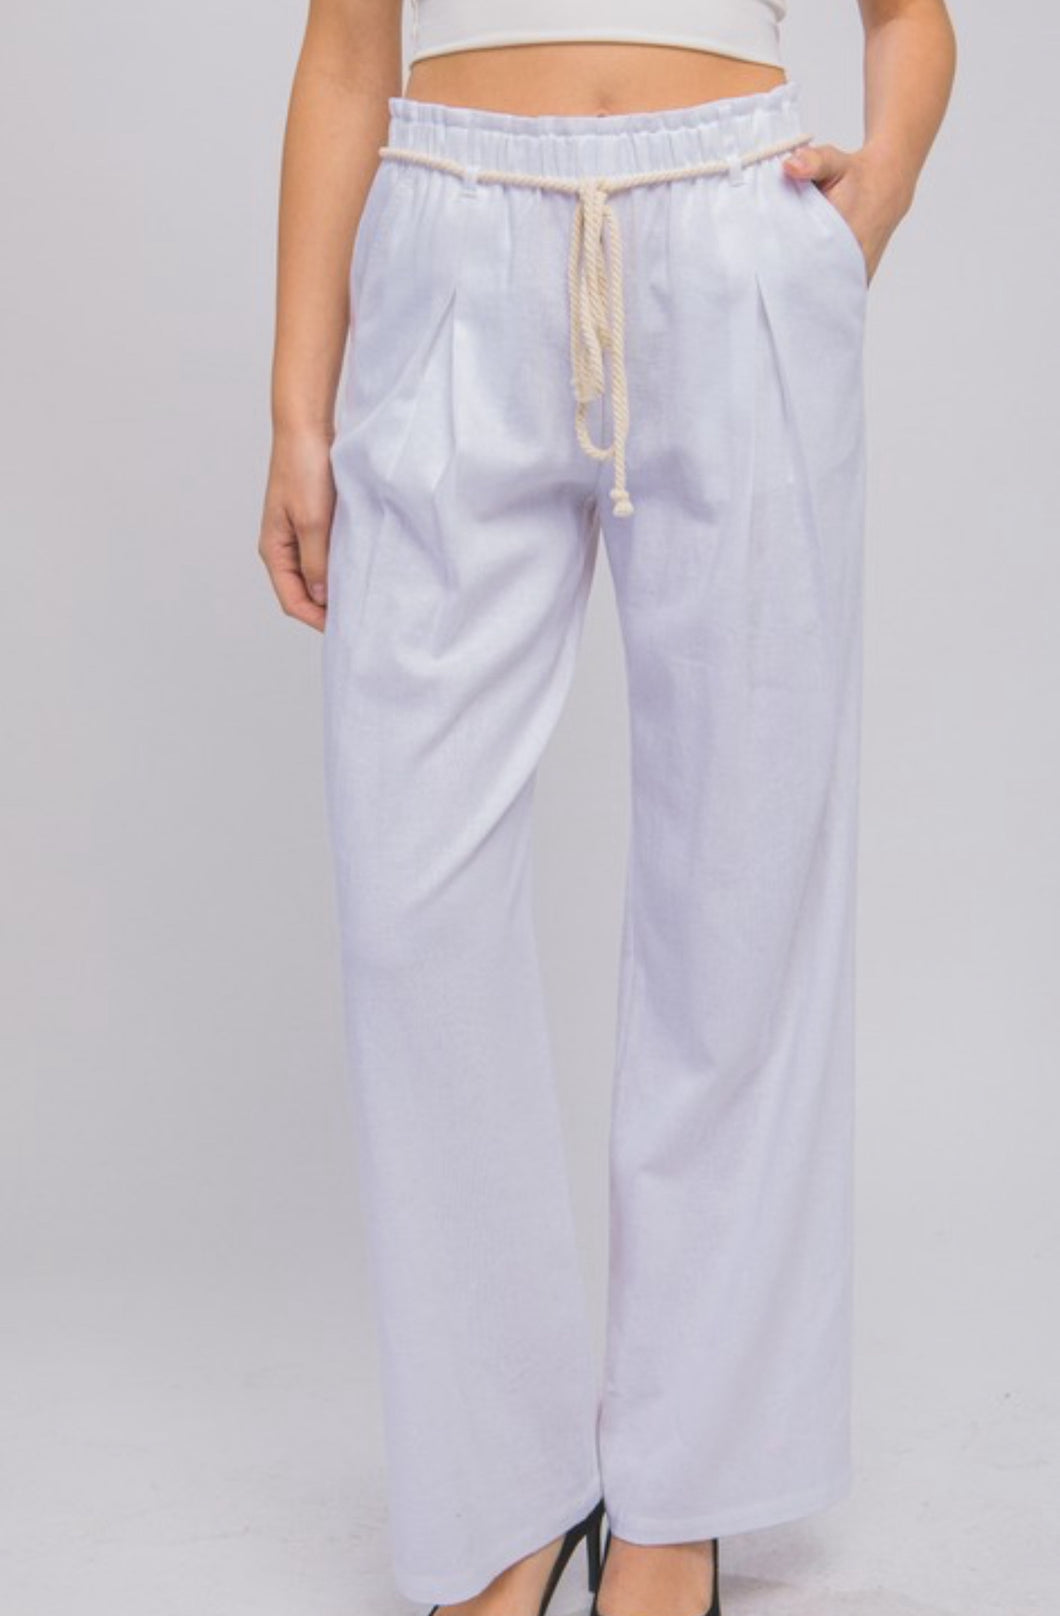 Ms. Extraordinary White Linen Blend Rope Pants